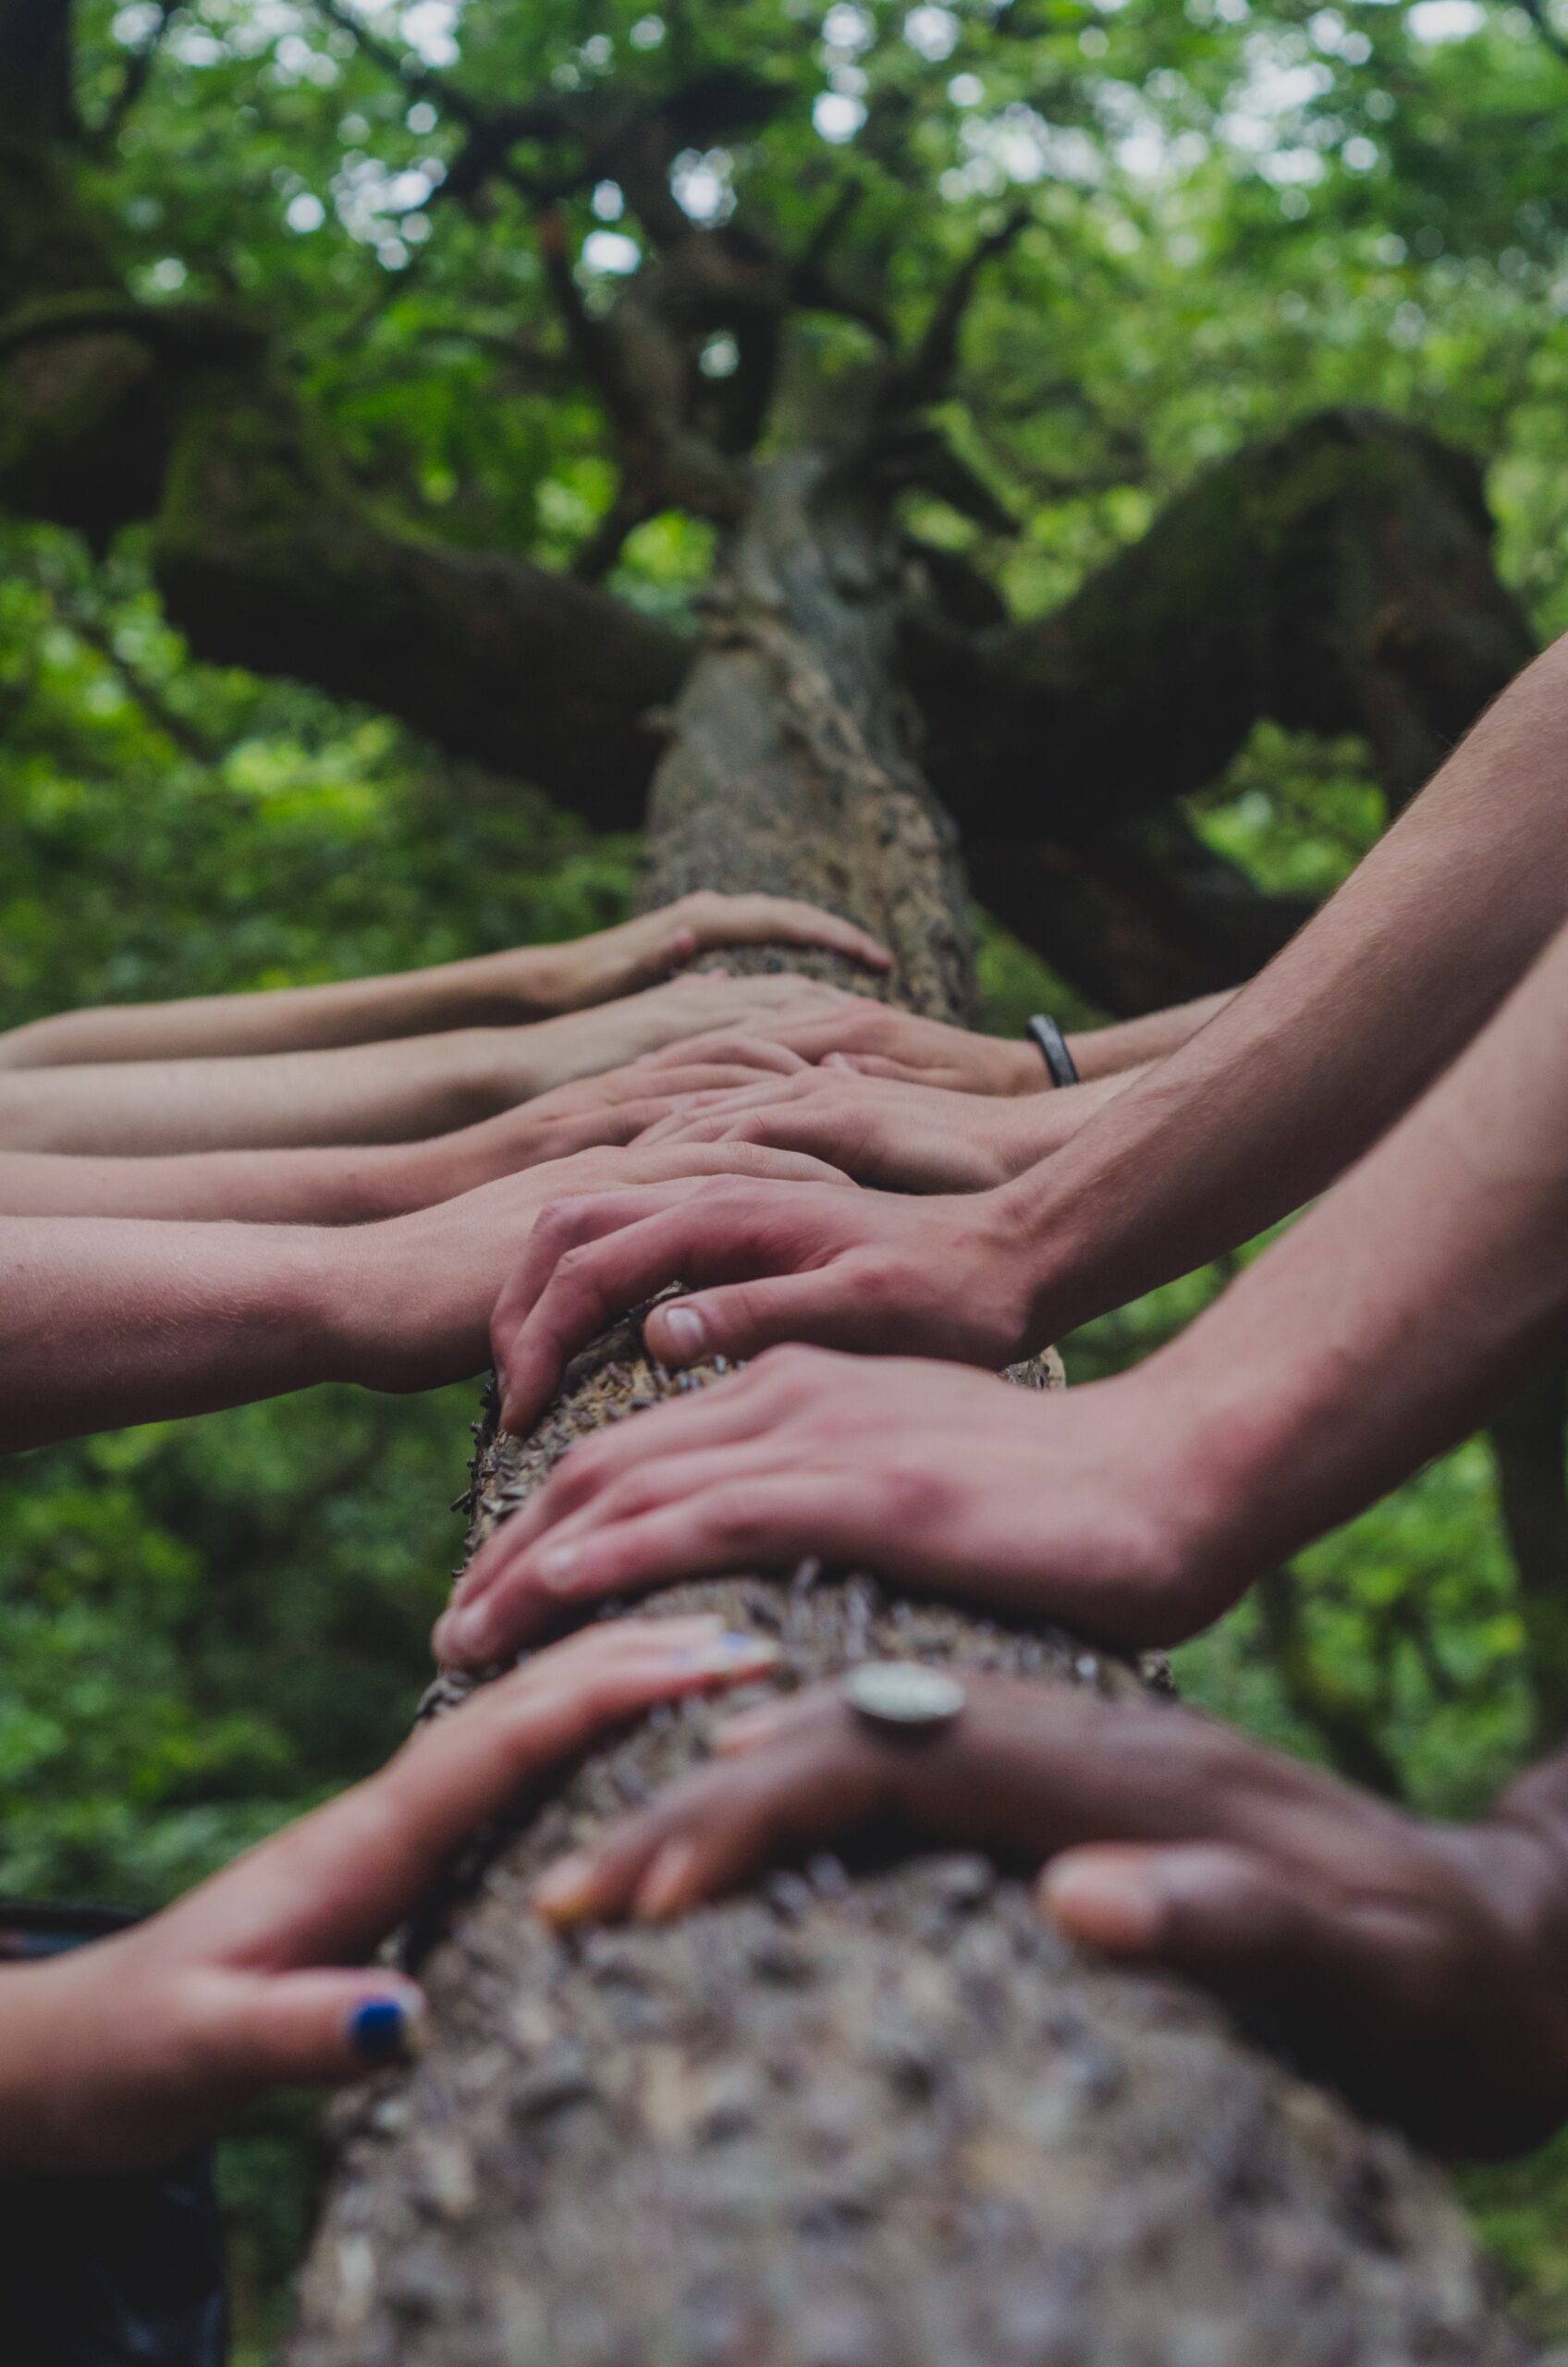 People's hands on the trunk of a tree.